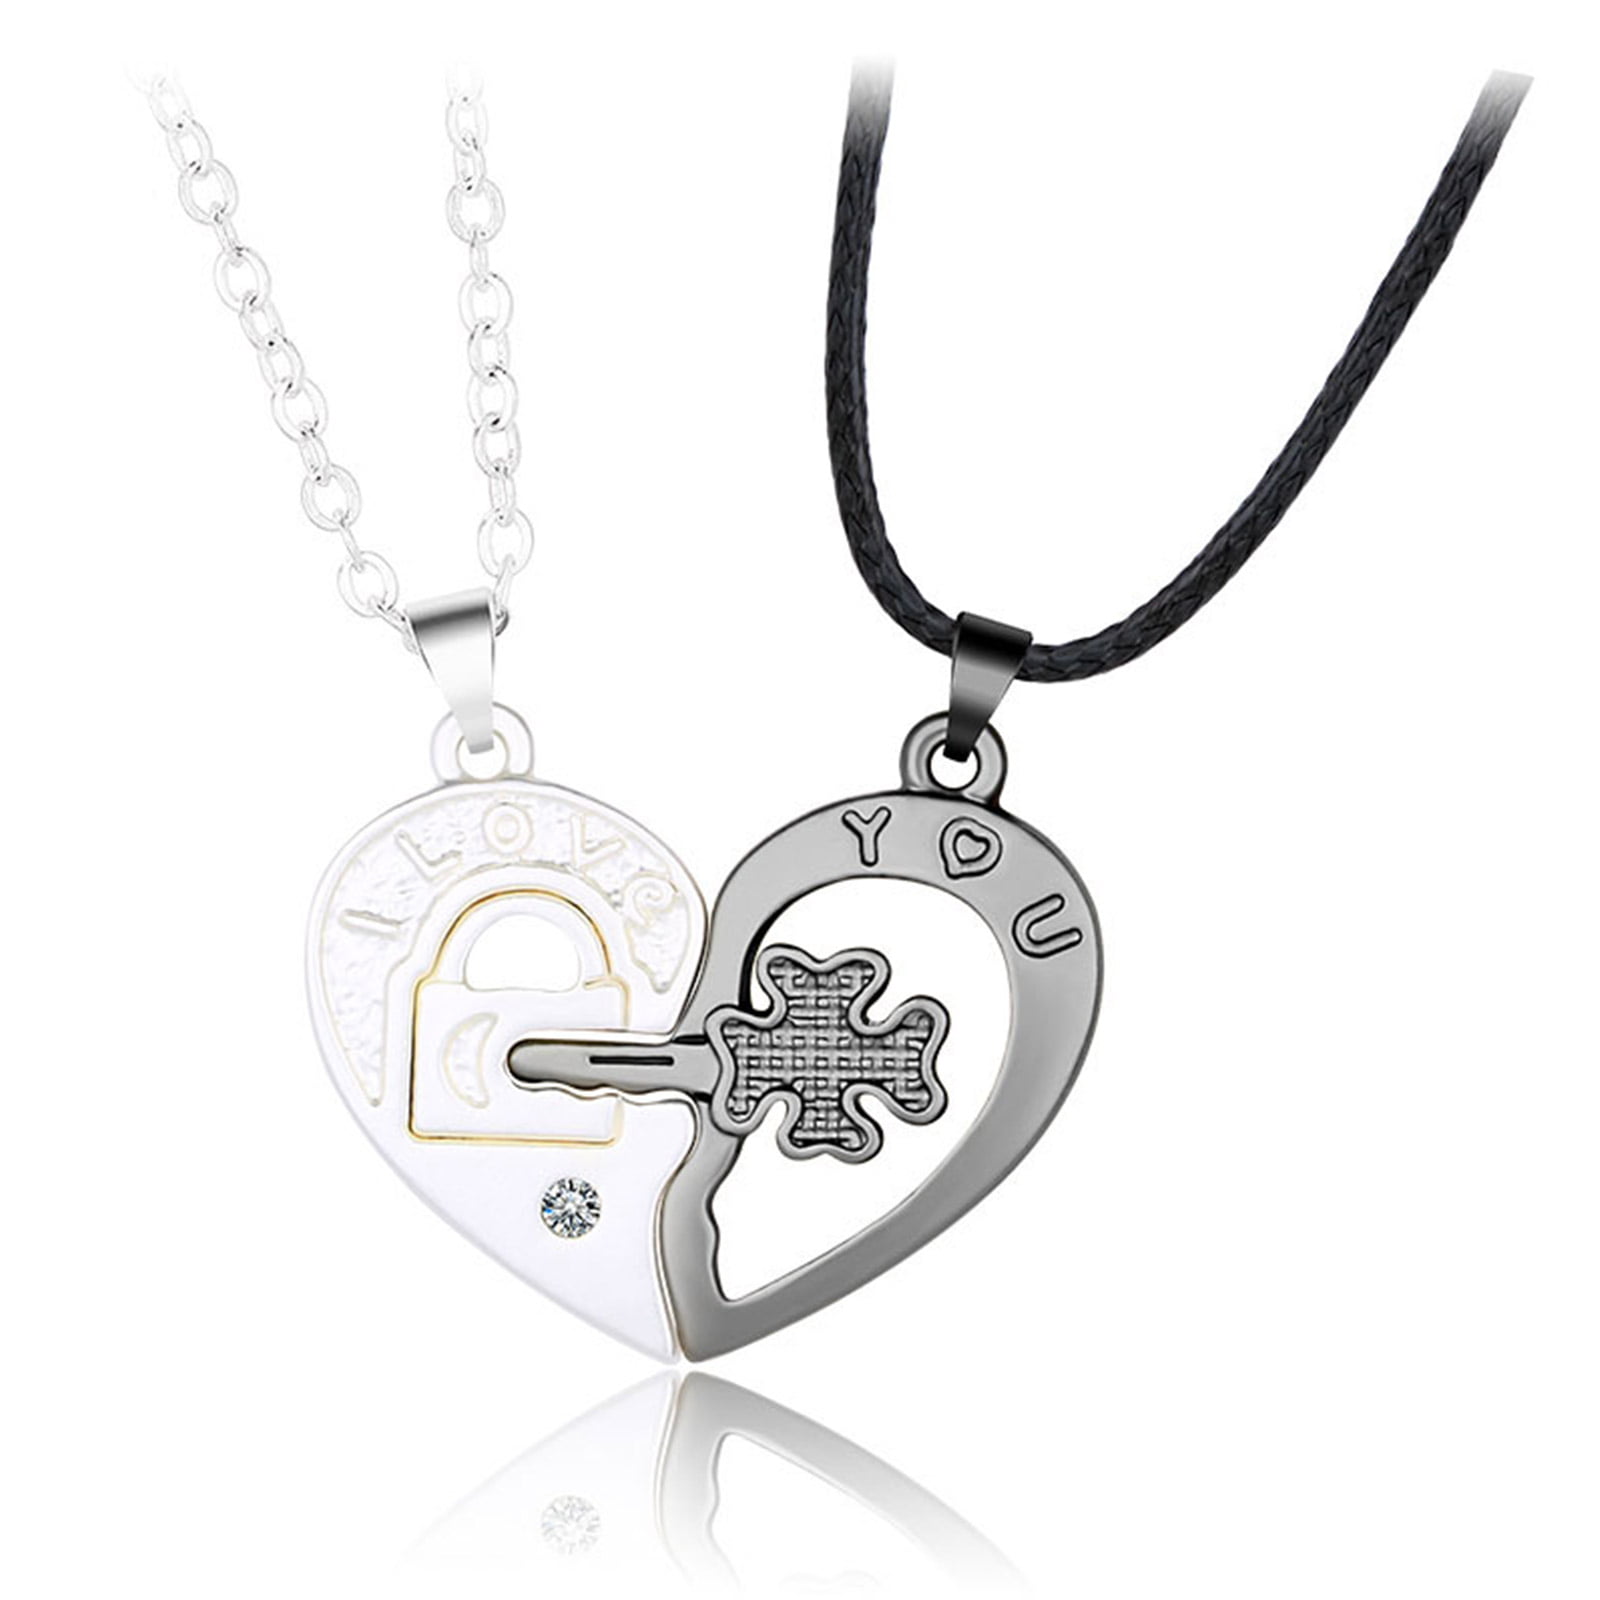  2X Personalized Key Heart Puzzle Necklace Set Interlocking  Heart Key Pendant Necklace for Women Couples Jewelry Present Heart Lock and Key  Necklace for Couples : Clothing, Shoes & Jewelry